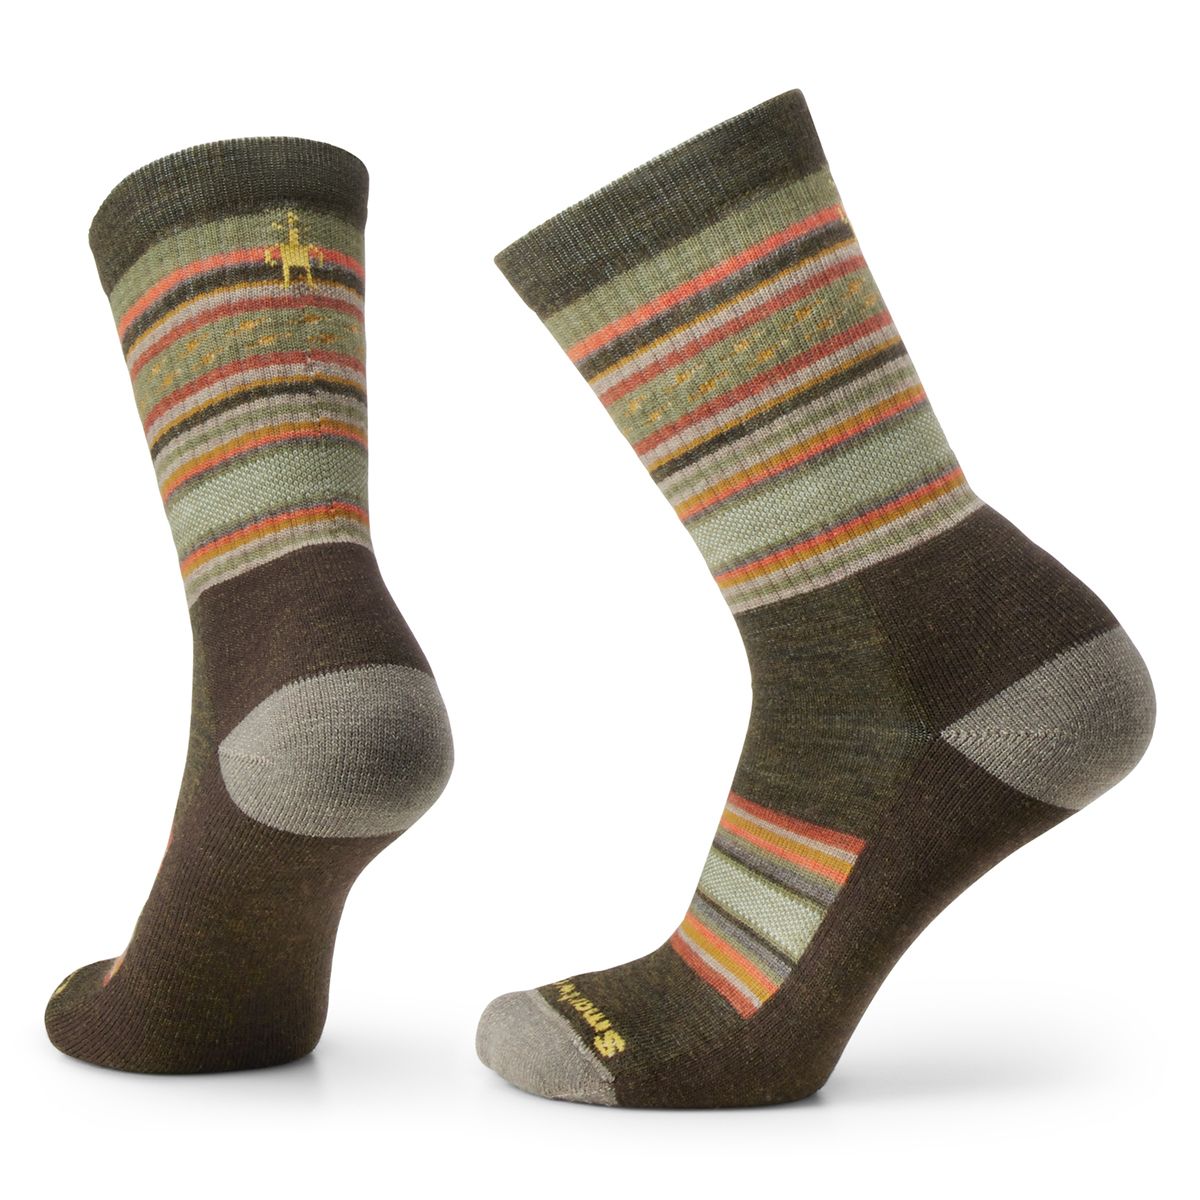 Smartwool launches “Second Cut Hike Sock” from recycled socks